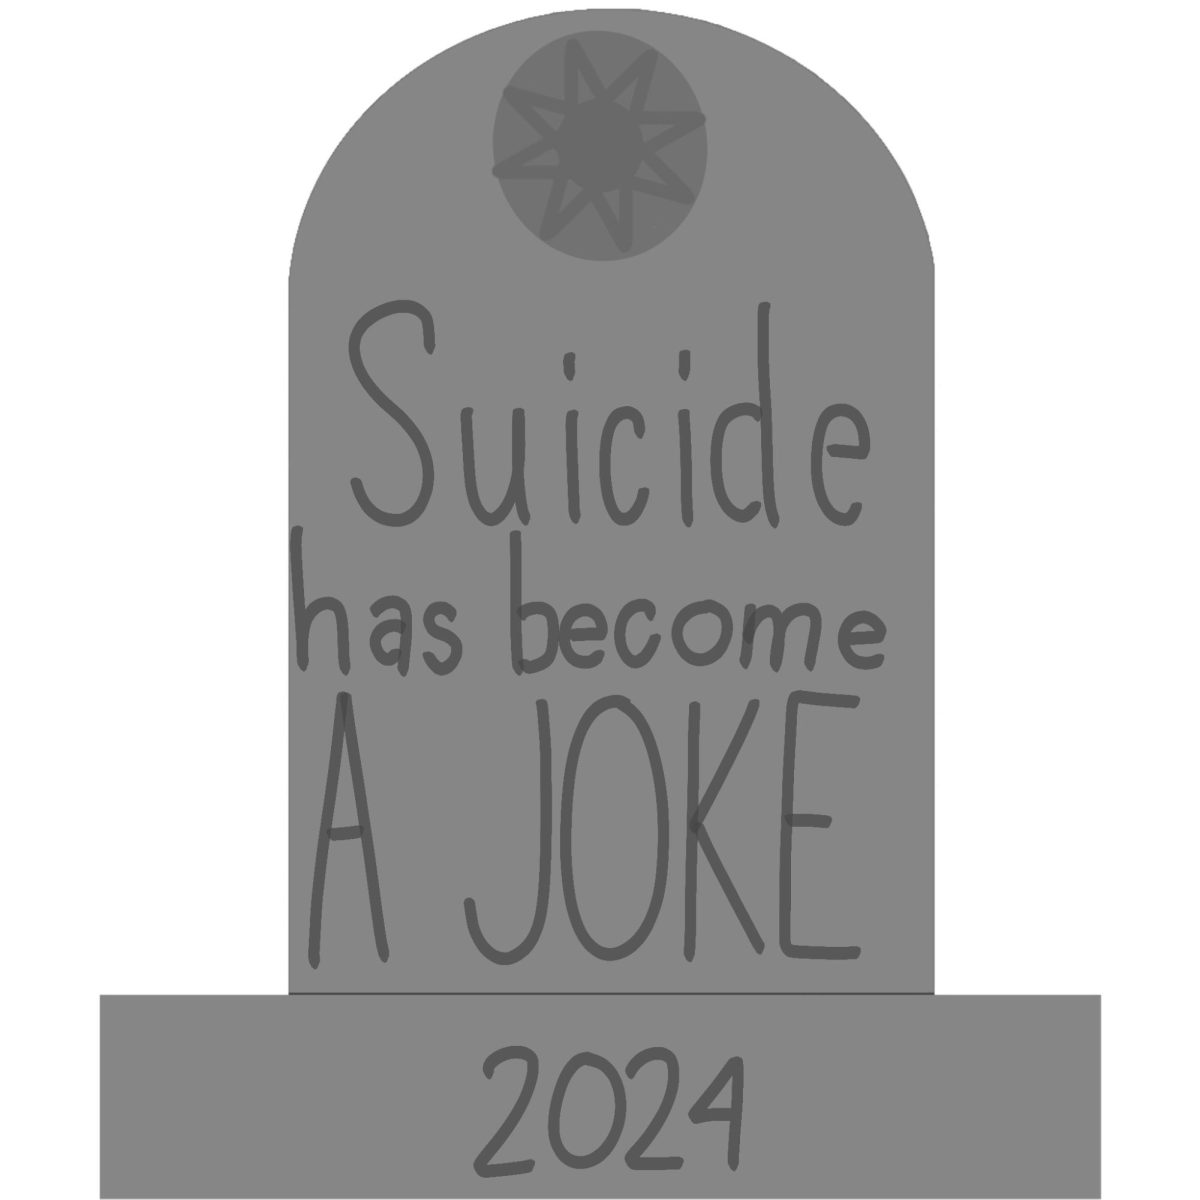 Kids have made suicide into a joke, but in reality its not. Suicide is the reason for 7 hundred thousand deaths. 